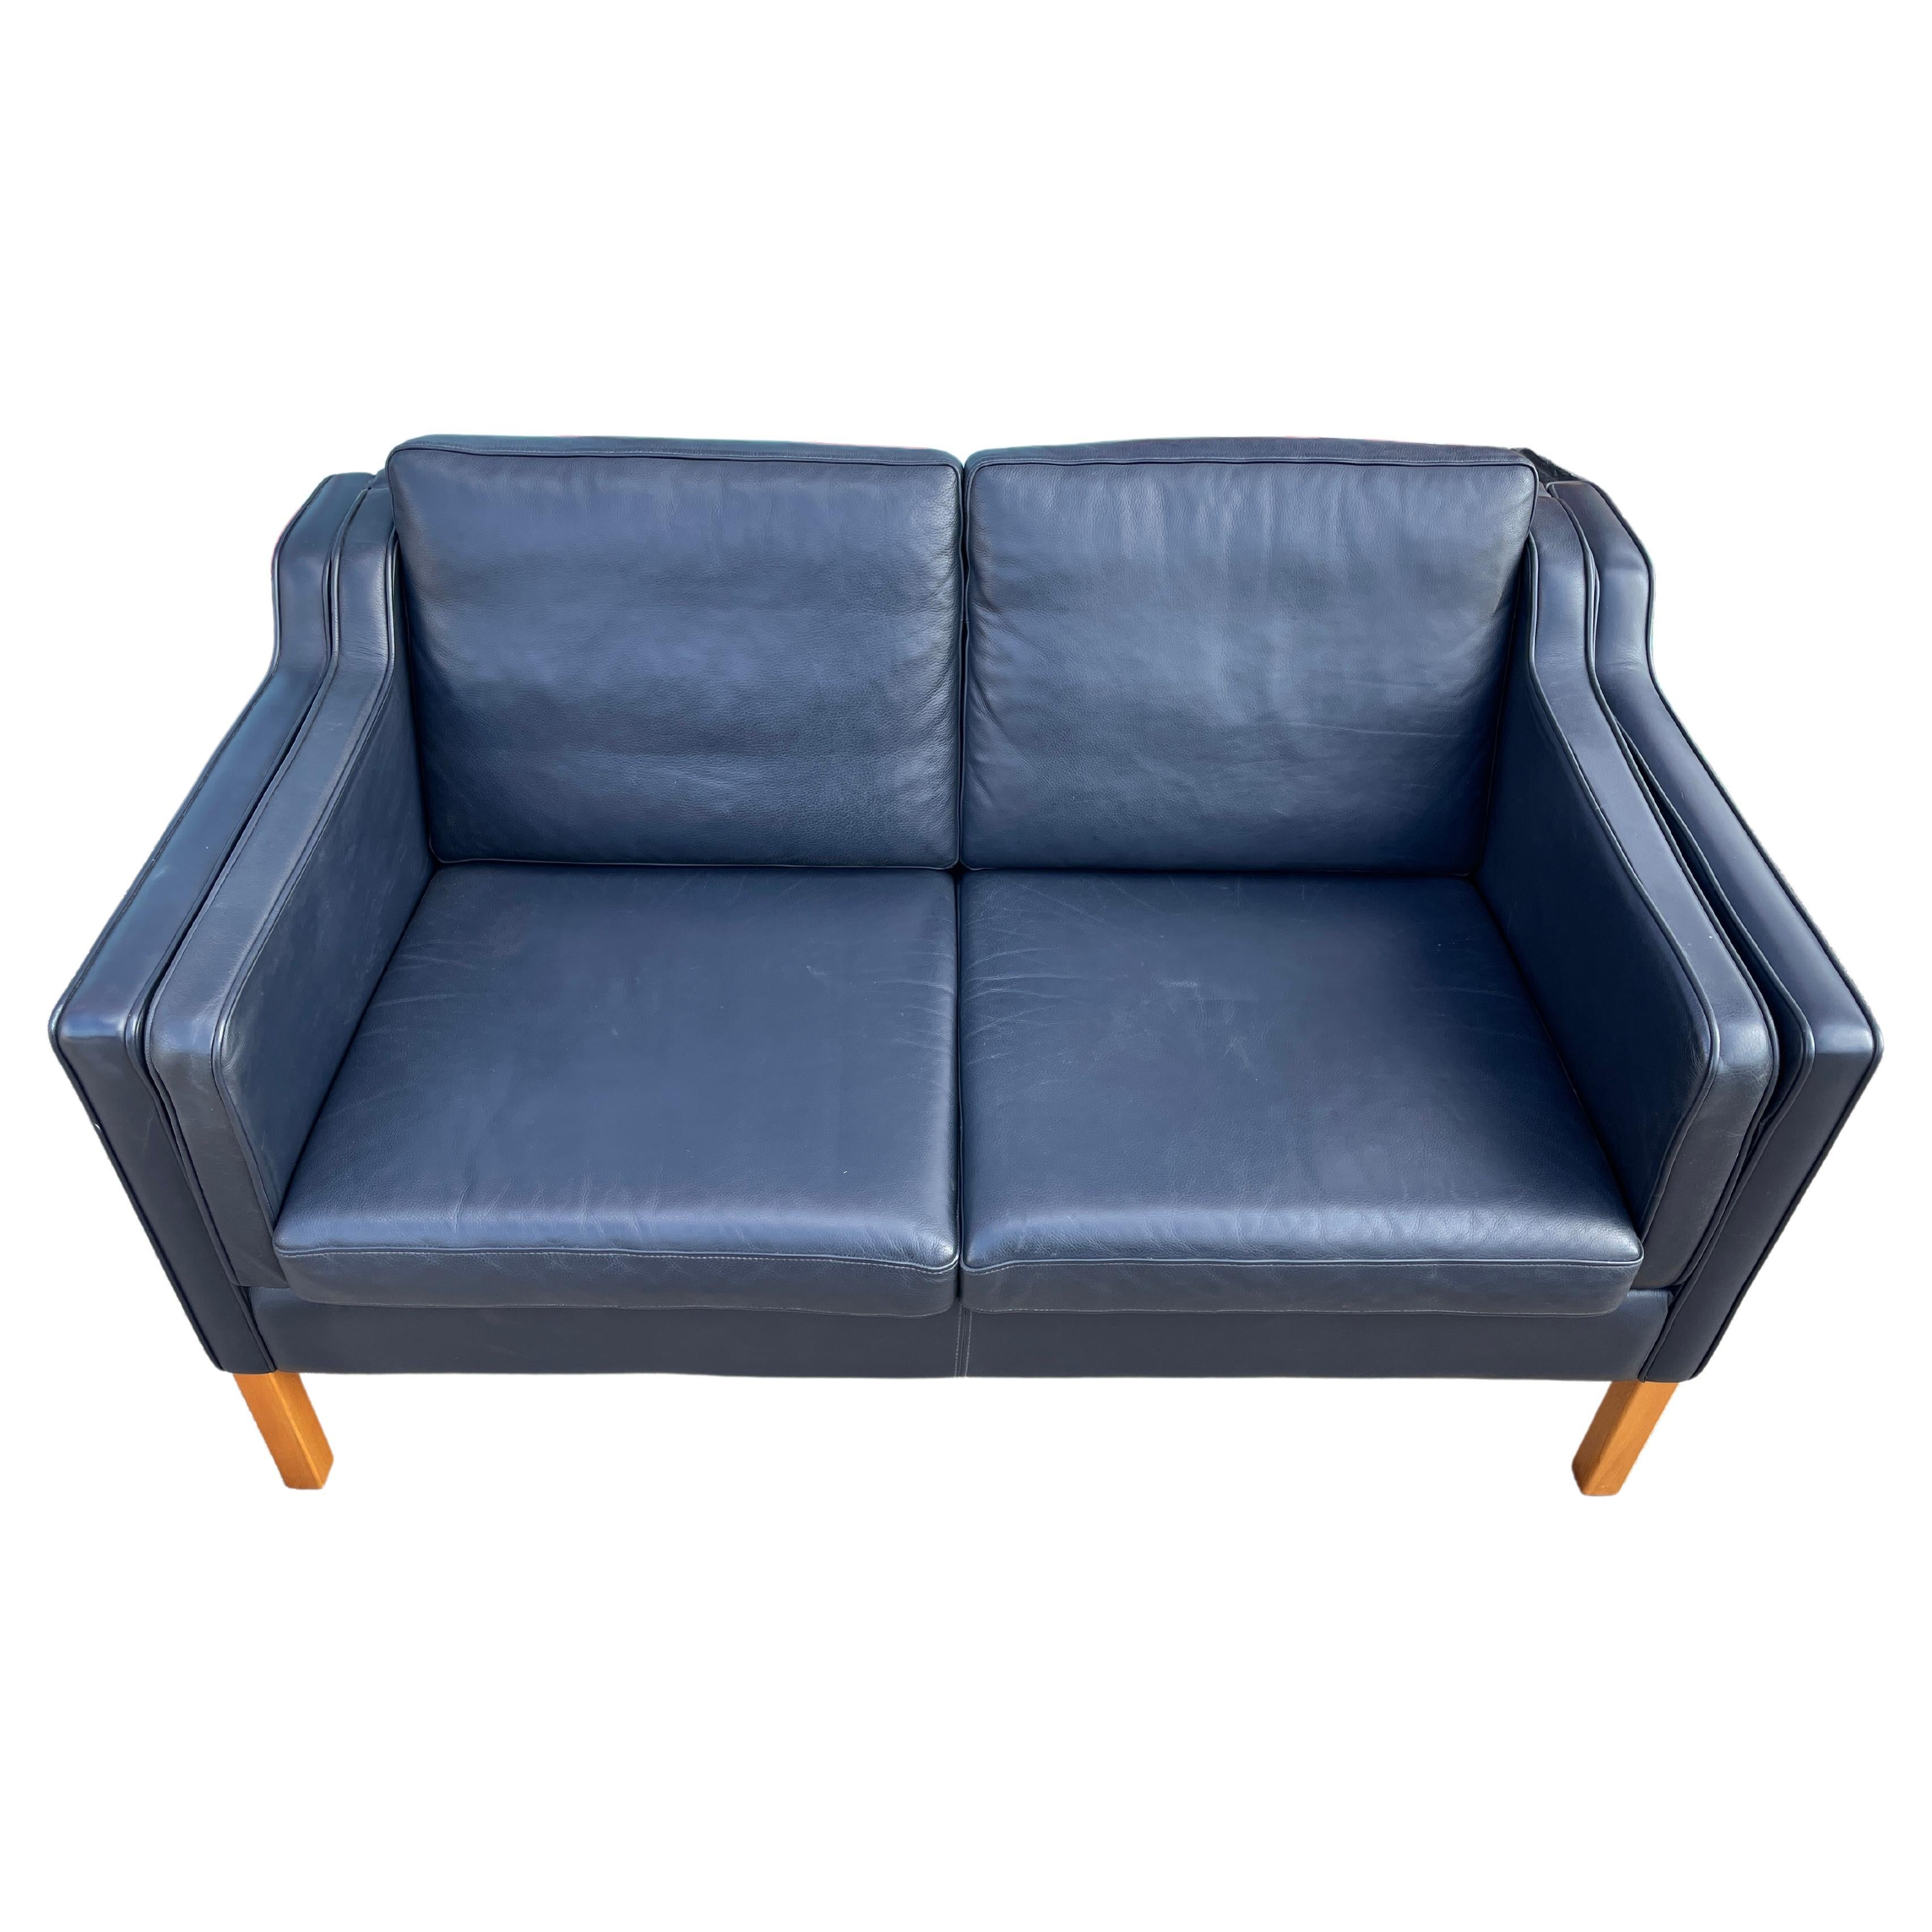 Mid century Danish modern beautiful Dark Navy Blue leather 2 seat sofa birch legs. Style of Børge Mogensen. Beautiful Navy Blue leather is soft and shows little to no signs of use but broken in nicely. Great small Danish Modern sofa. Great